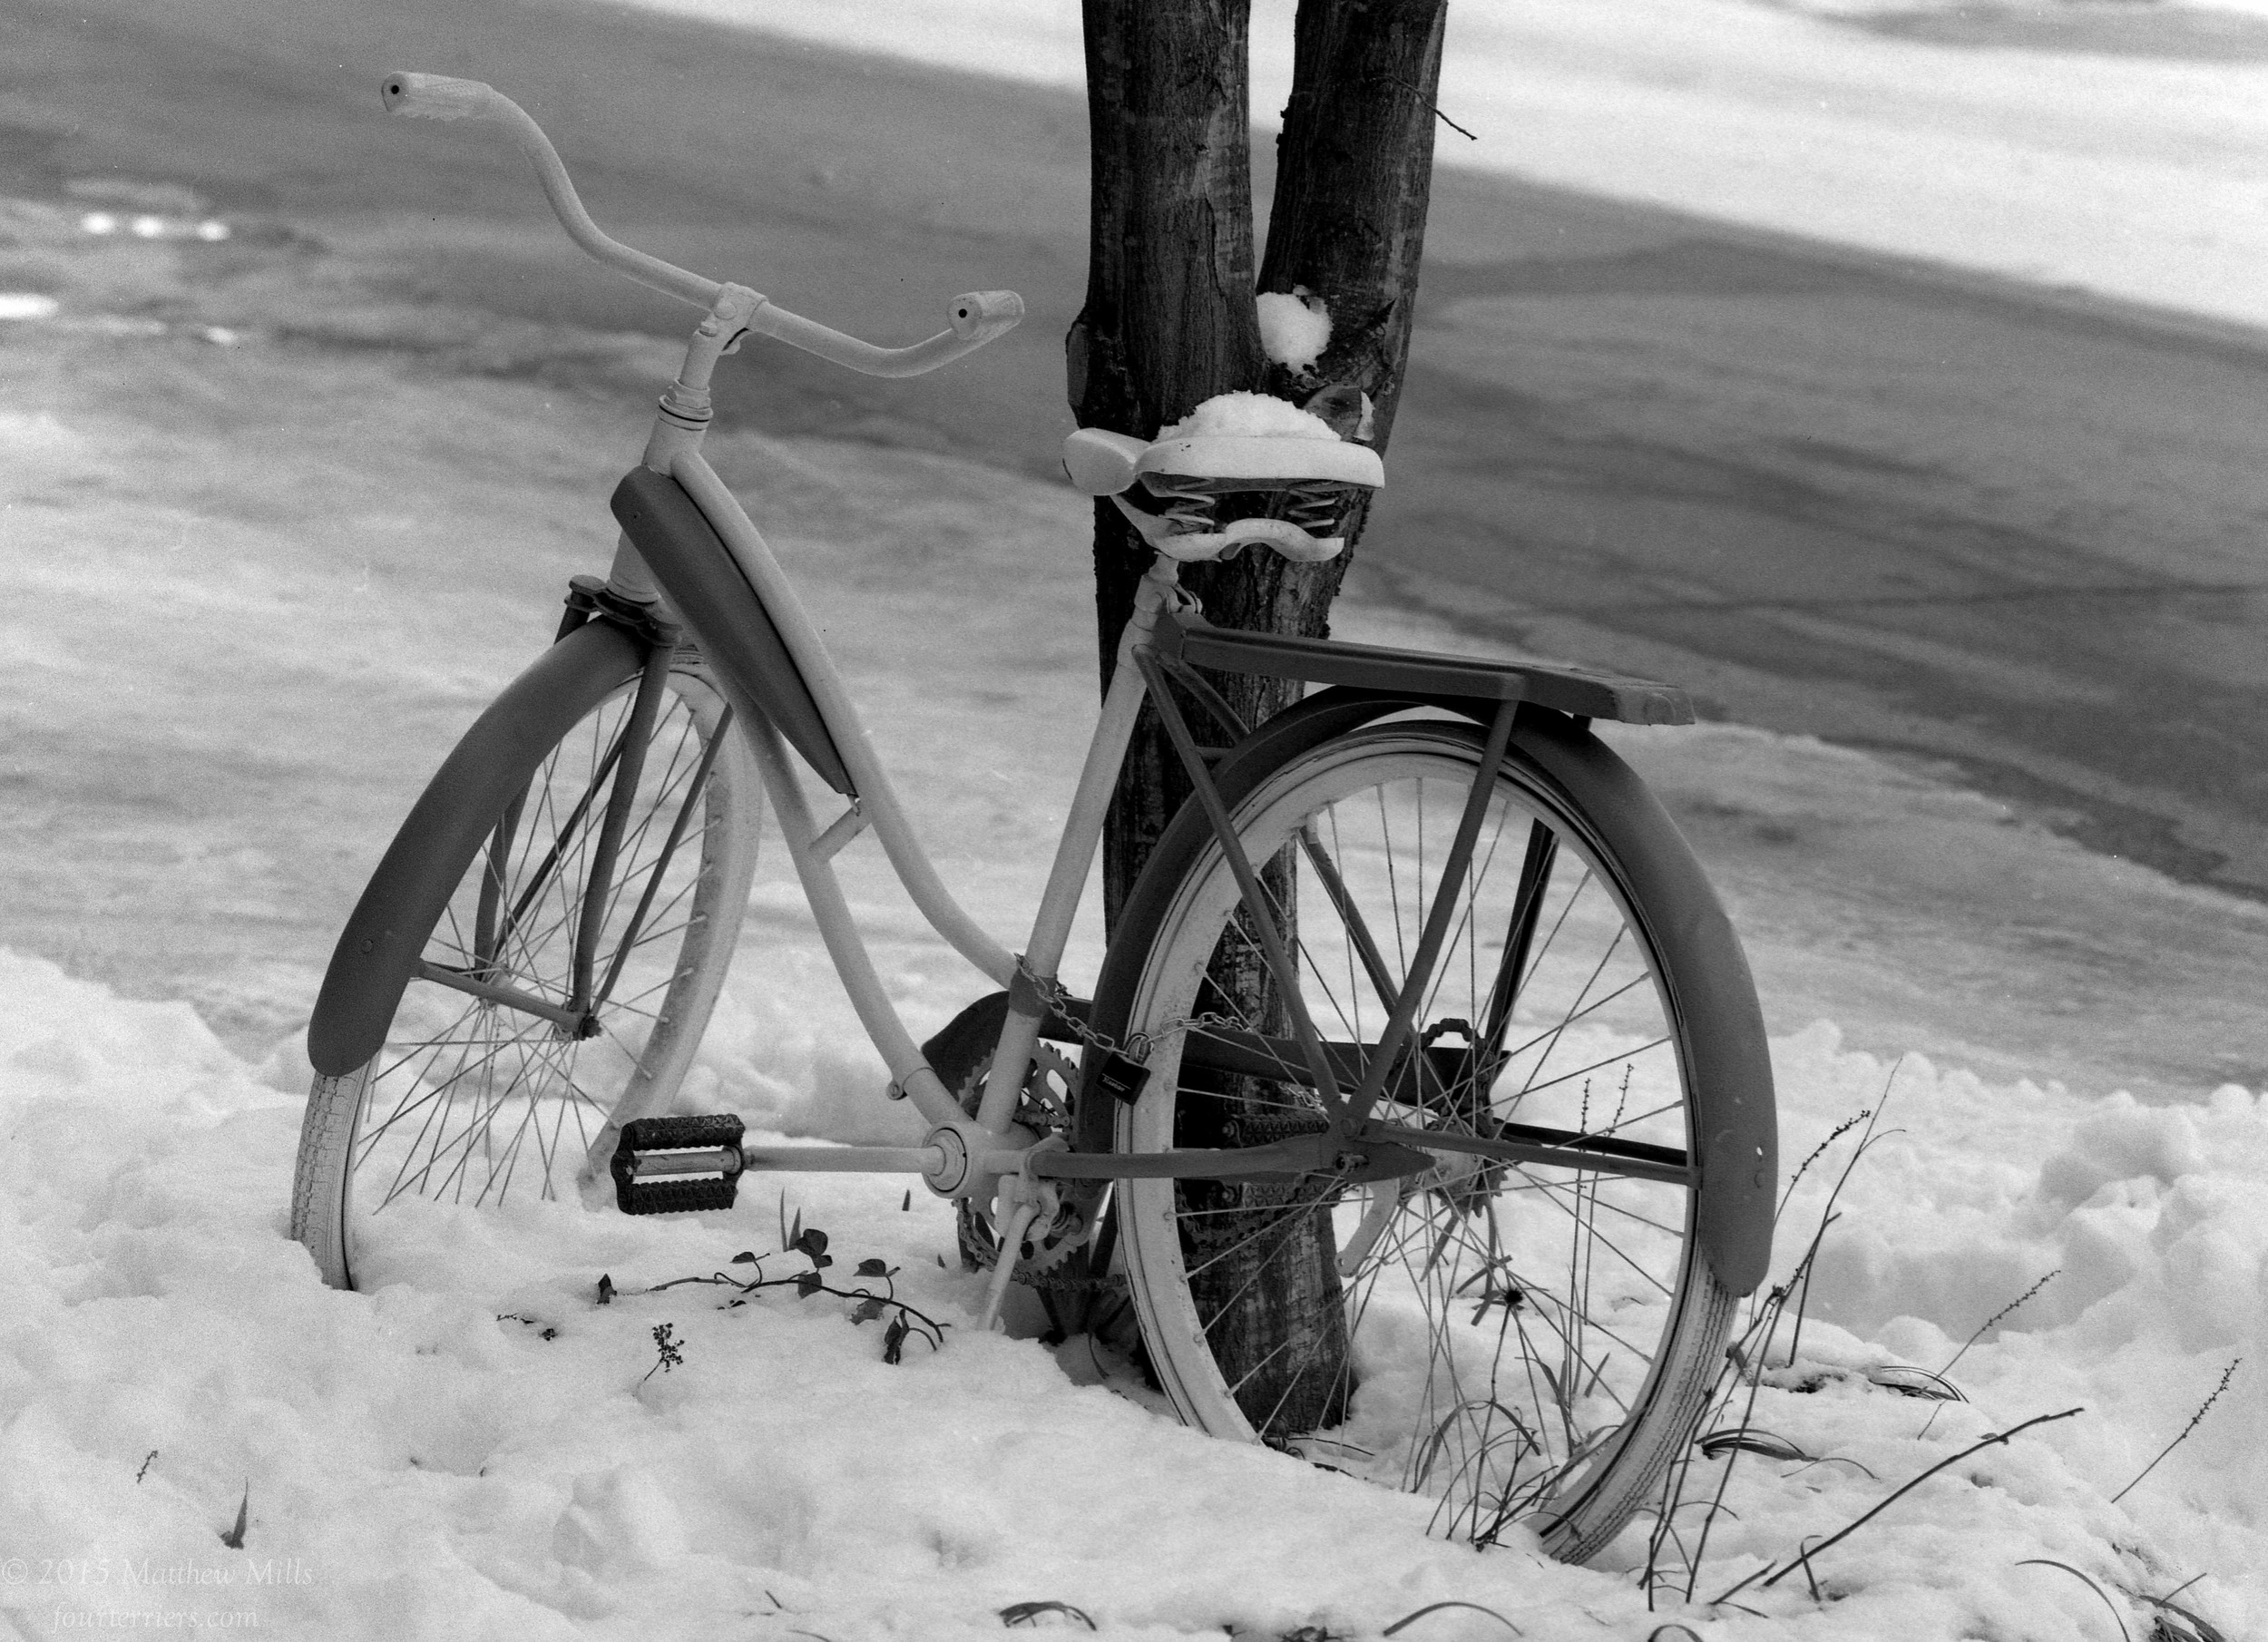 Bike in Snow on a Warm Spring Day